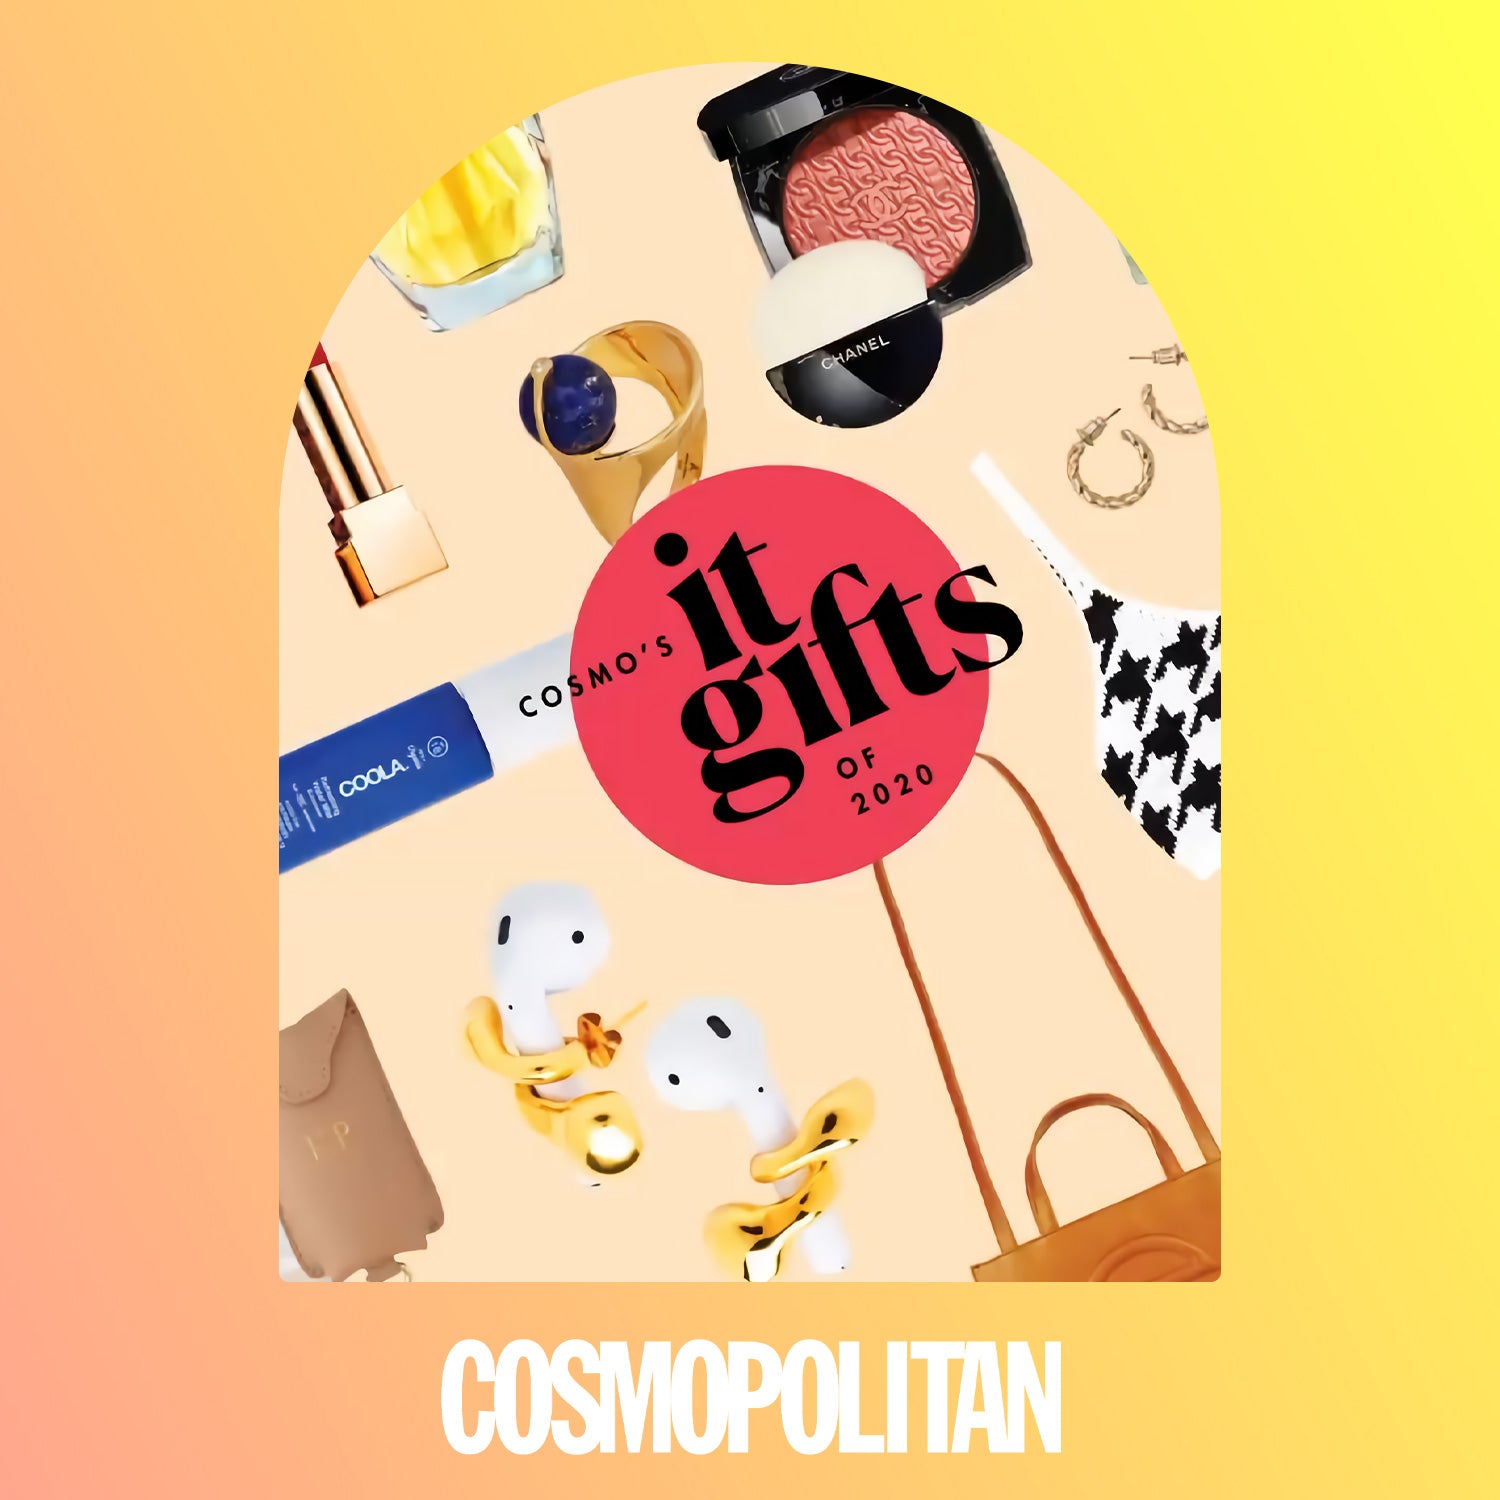 Cosmo's It Gifts of 2020